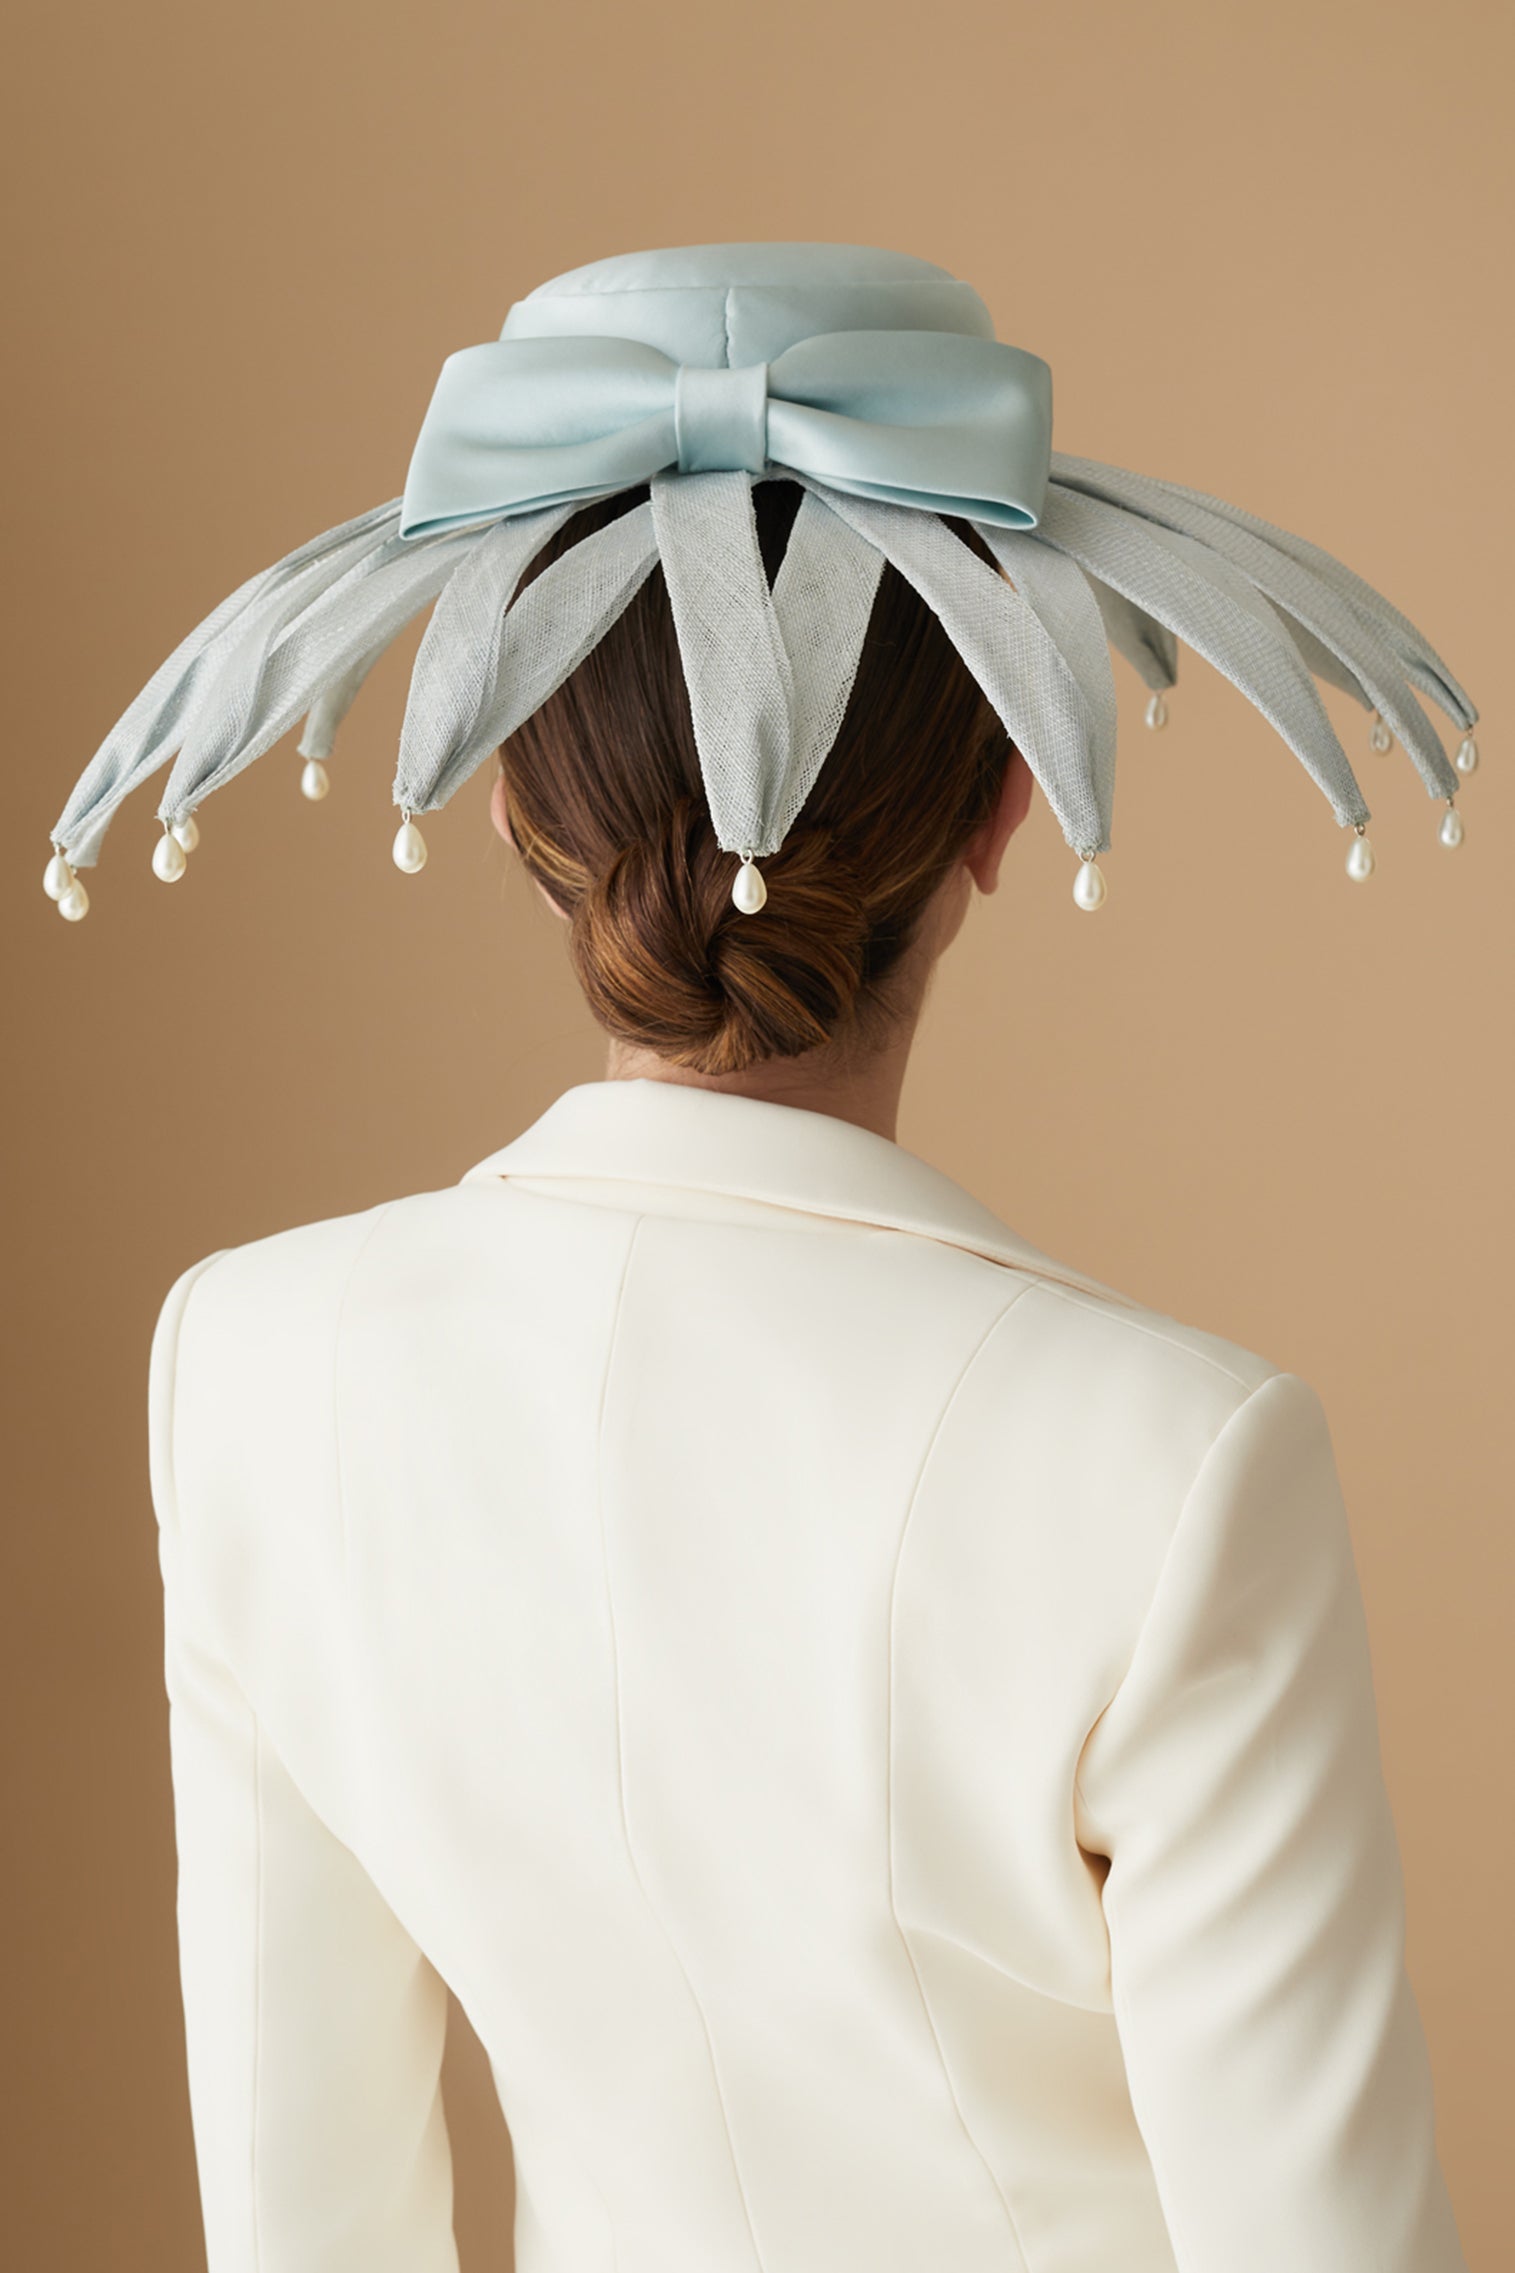 Sencha Duck Egg Wide Brim Hat - Lock Couture by Awon Golding - Lock & Co. Hatters London UK